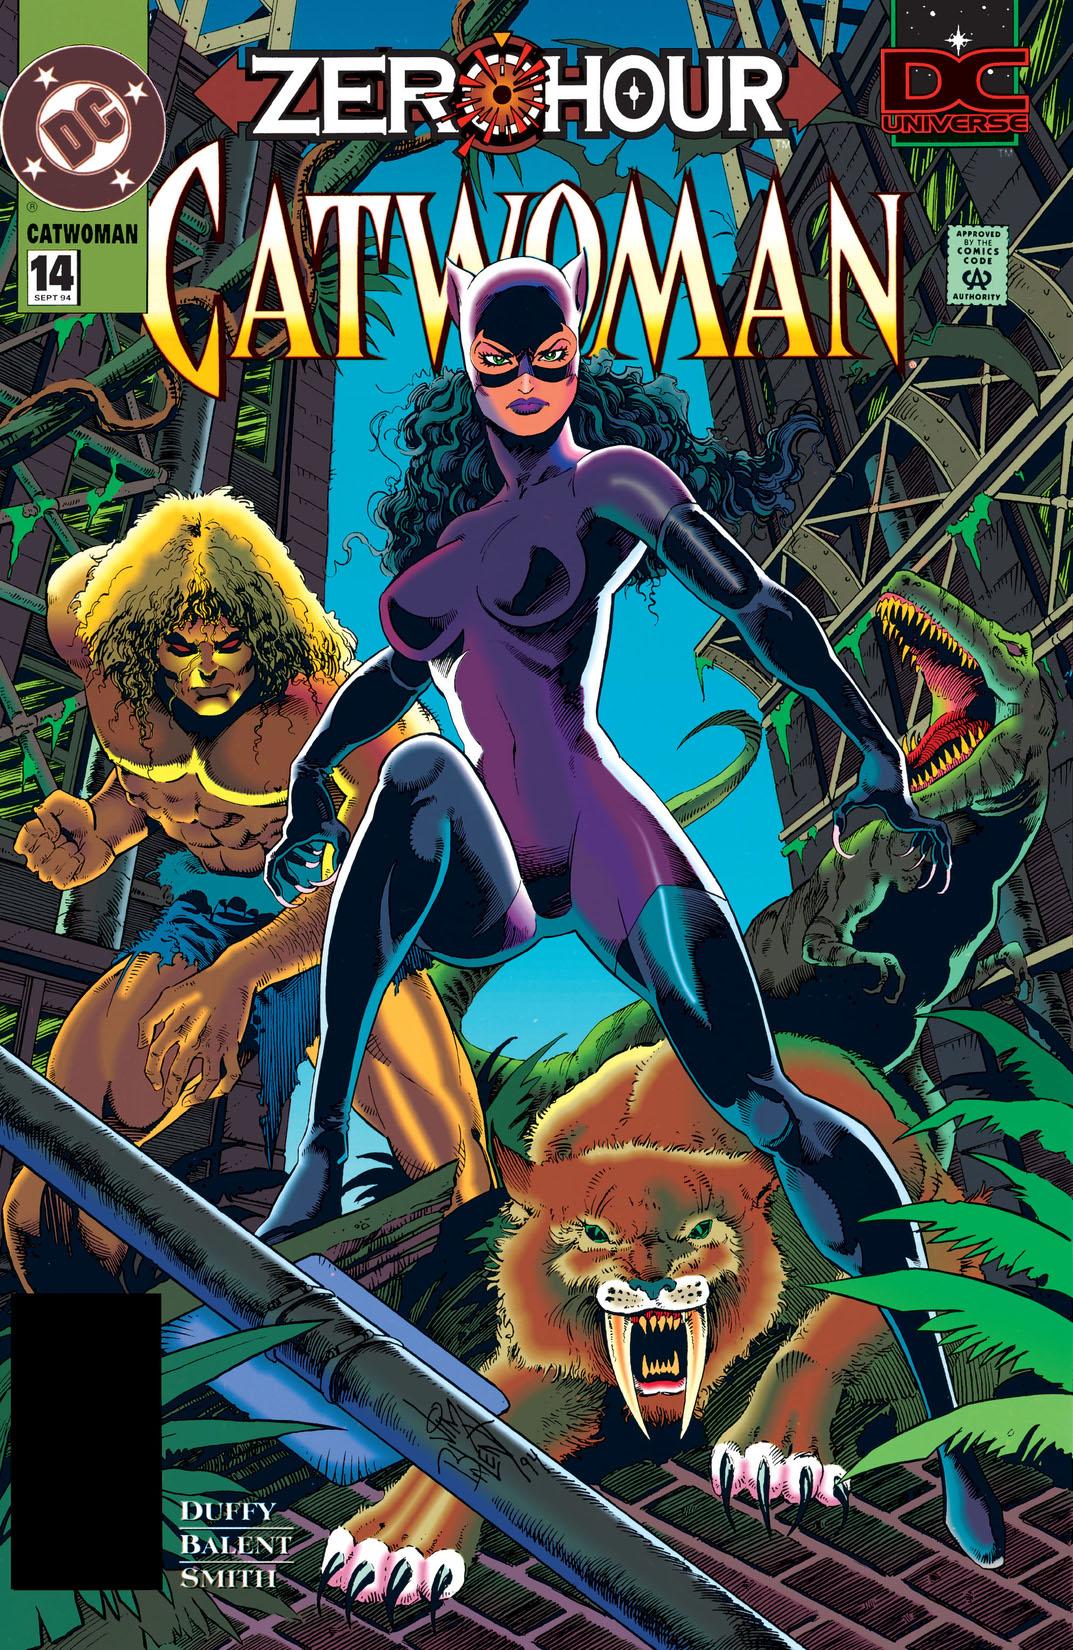 Catwoman (1993-) #14 preview images